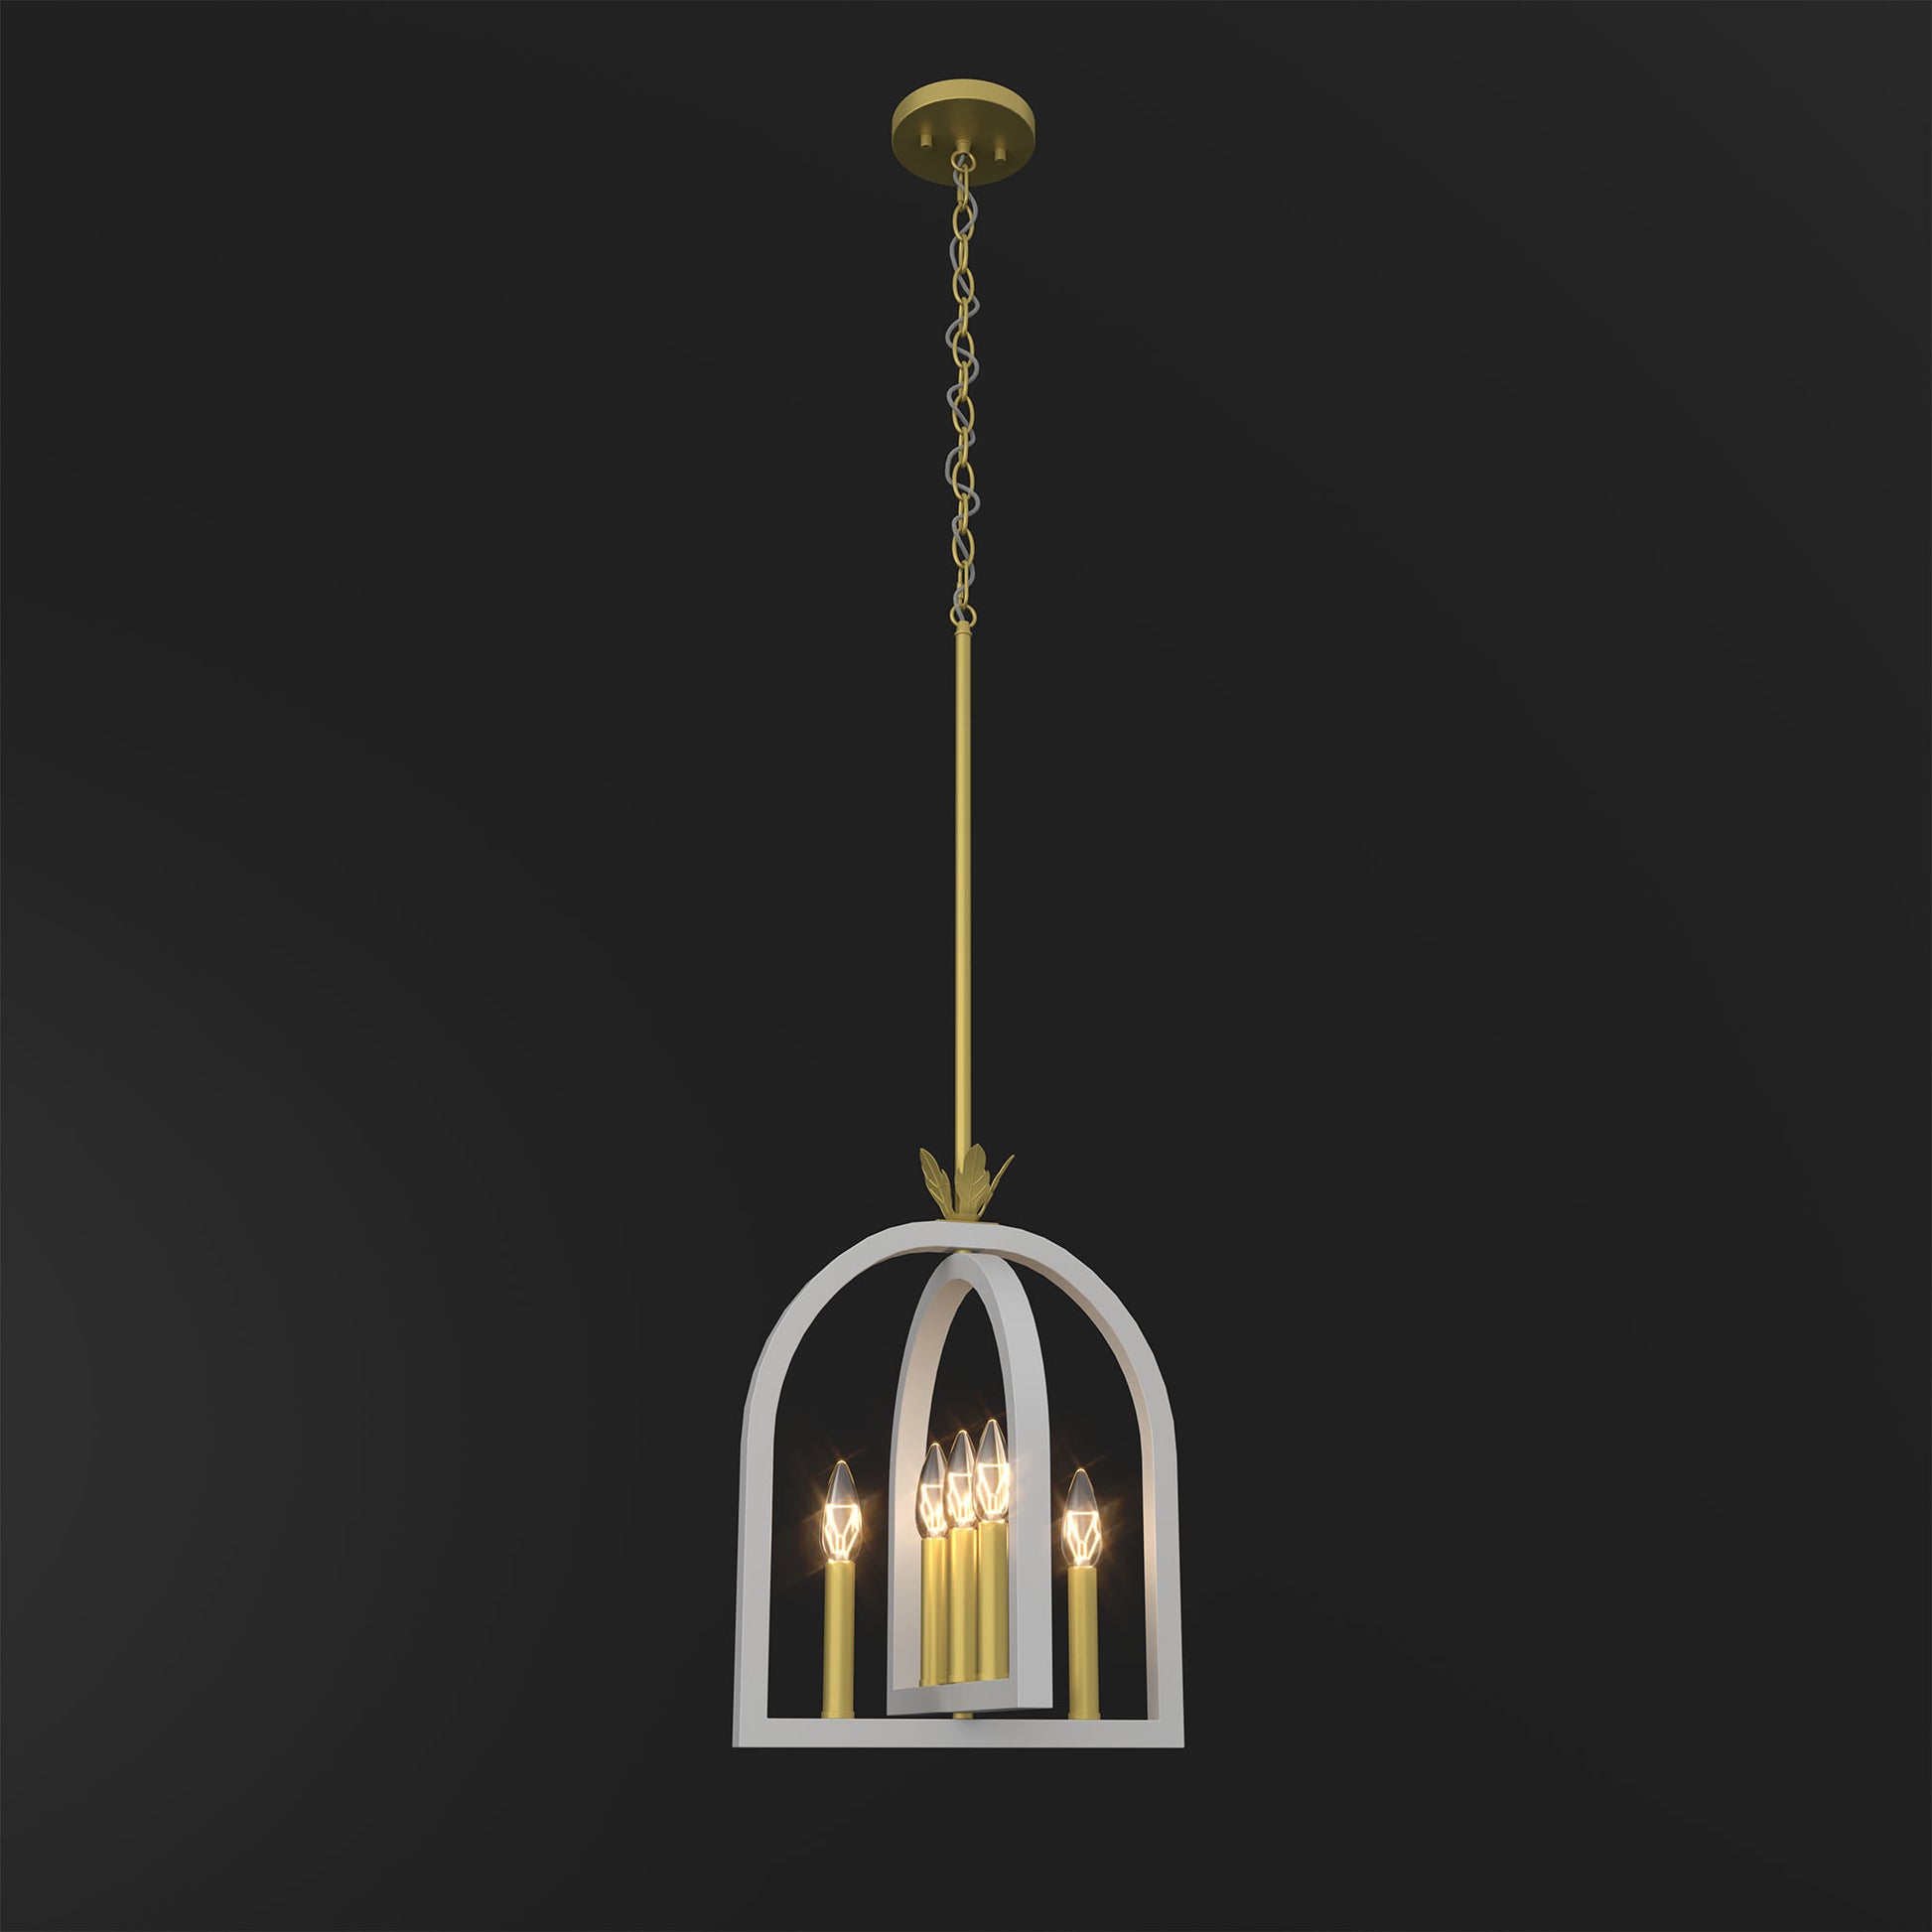 5 light empire lantern chandelier (7) by ACROMA